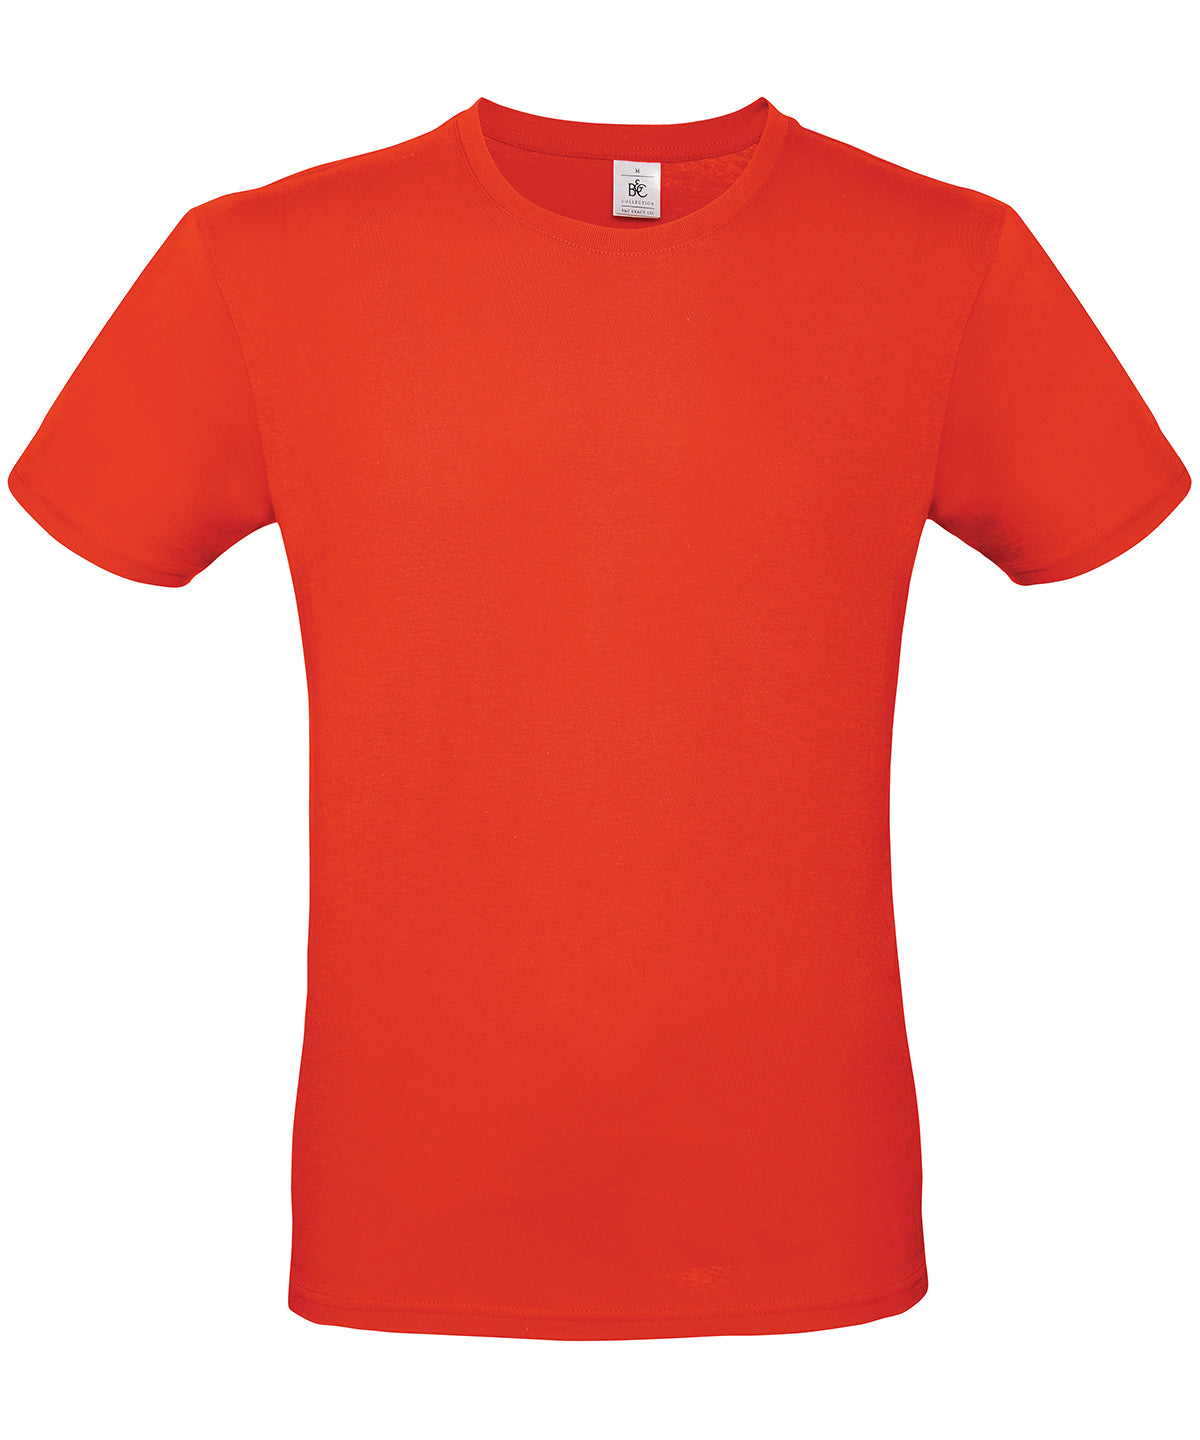 Personalised T-Shirts - Royal B&C Collection B&C #E150